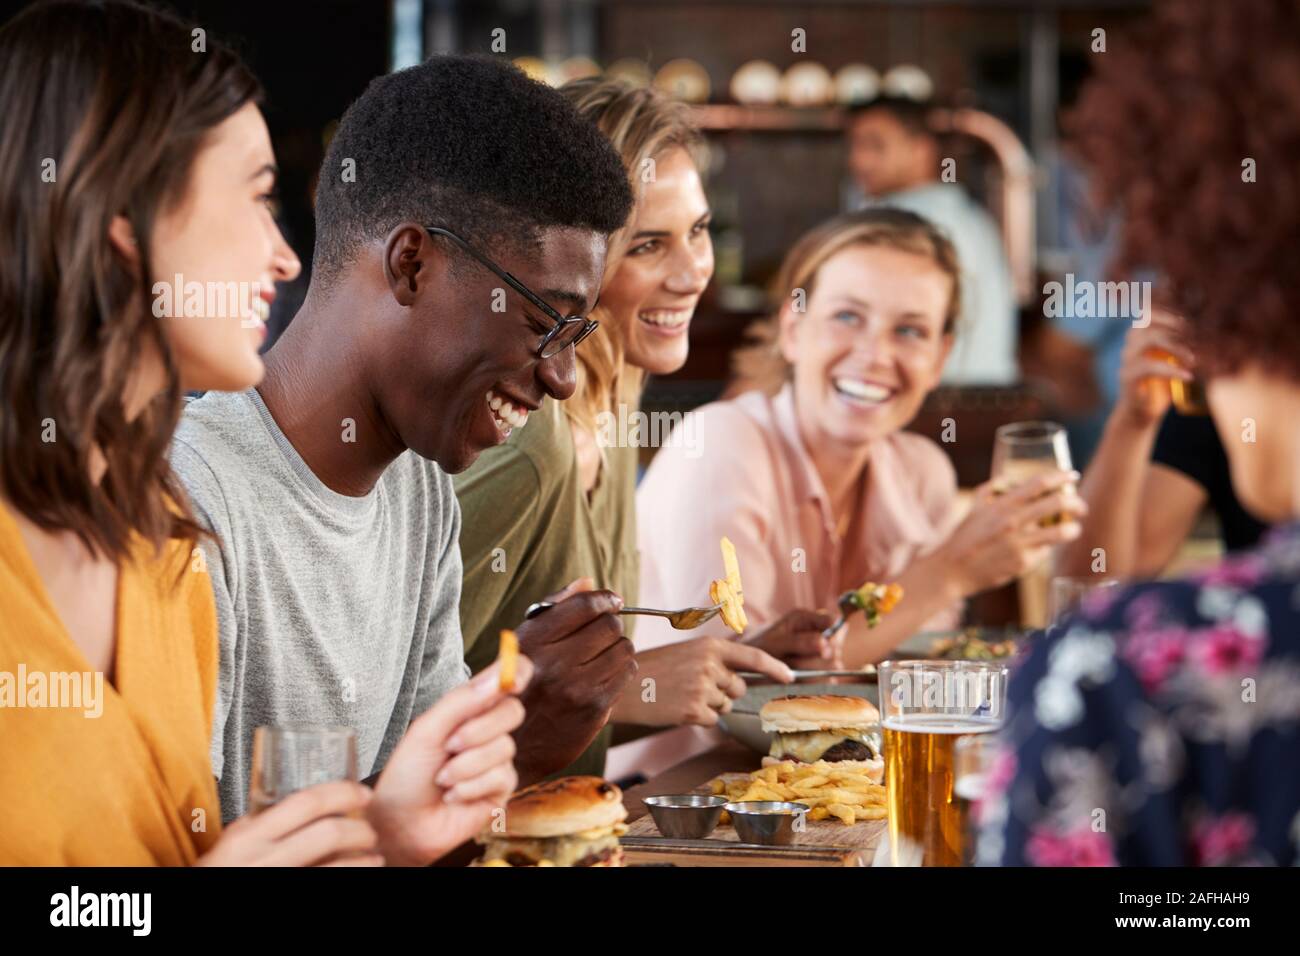 Group Of Young Friends Meeting For Drinks And Food In Restaurant Stock Photo